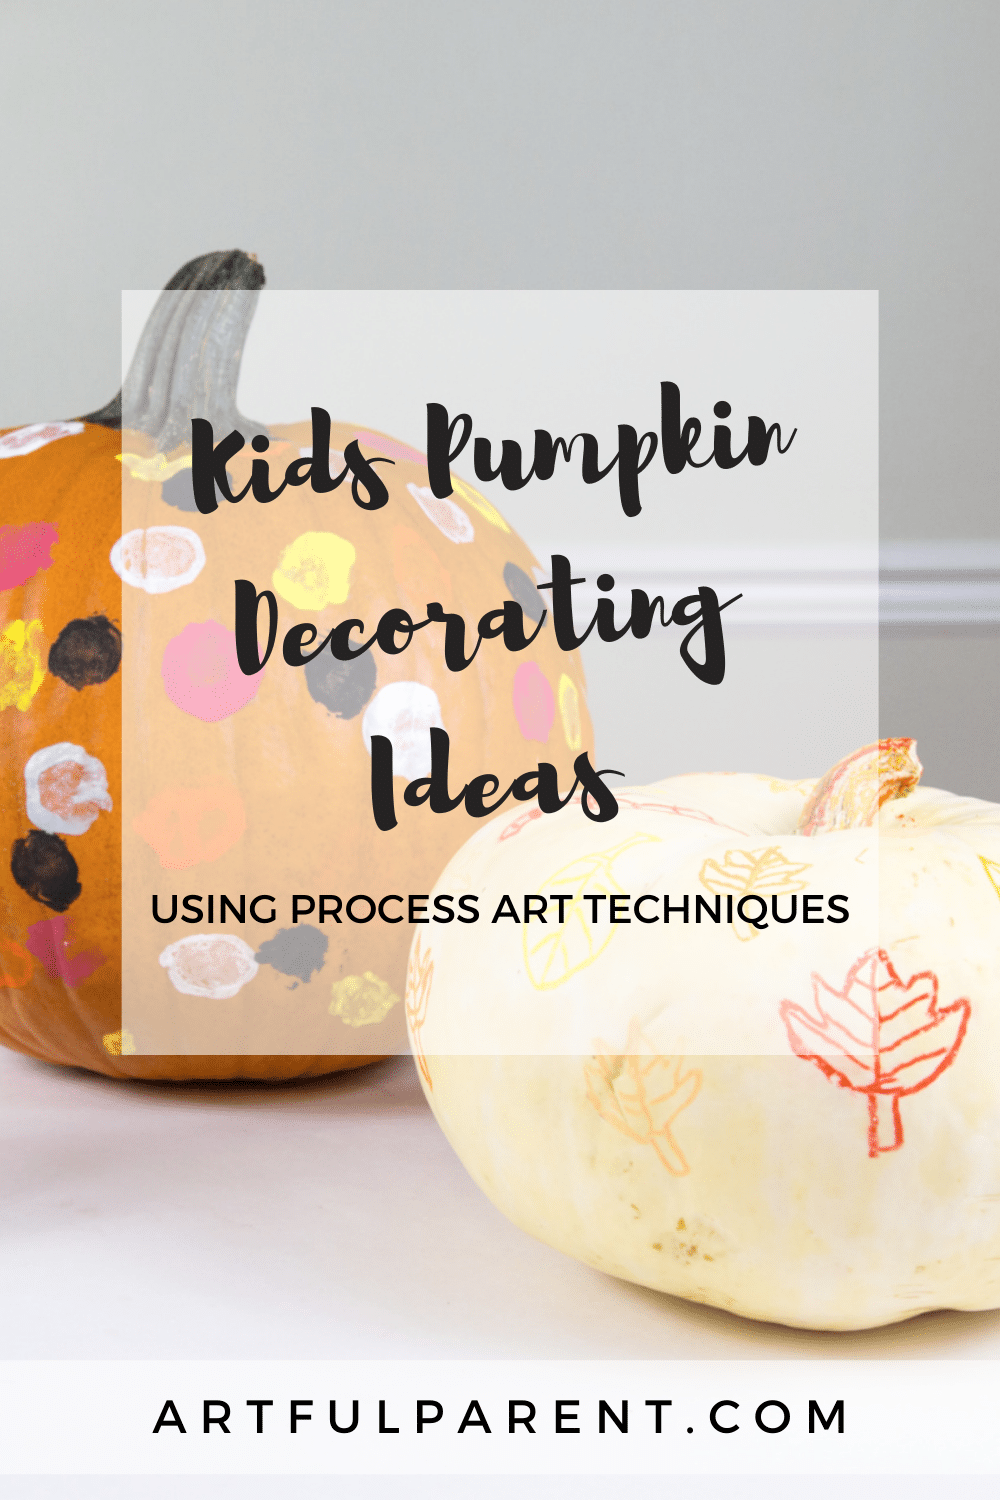 12 No Carve Kids Pumpkin Decorating Ideas to Try with Process Art